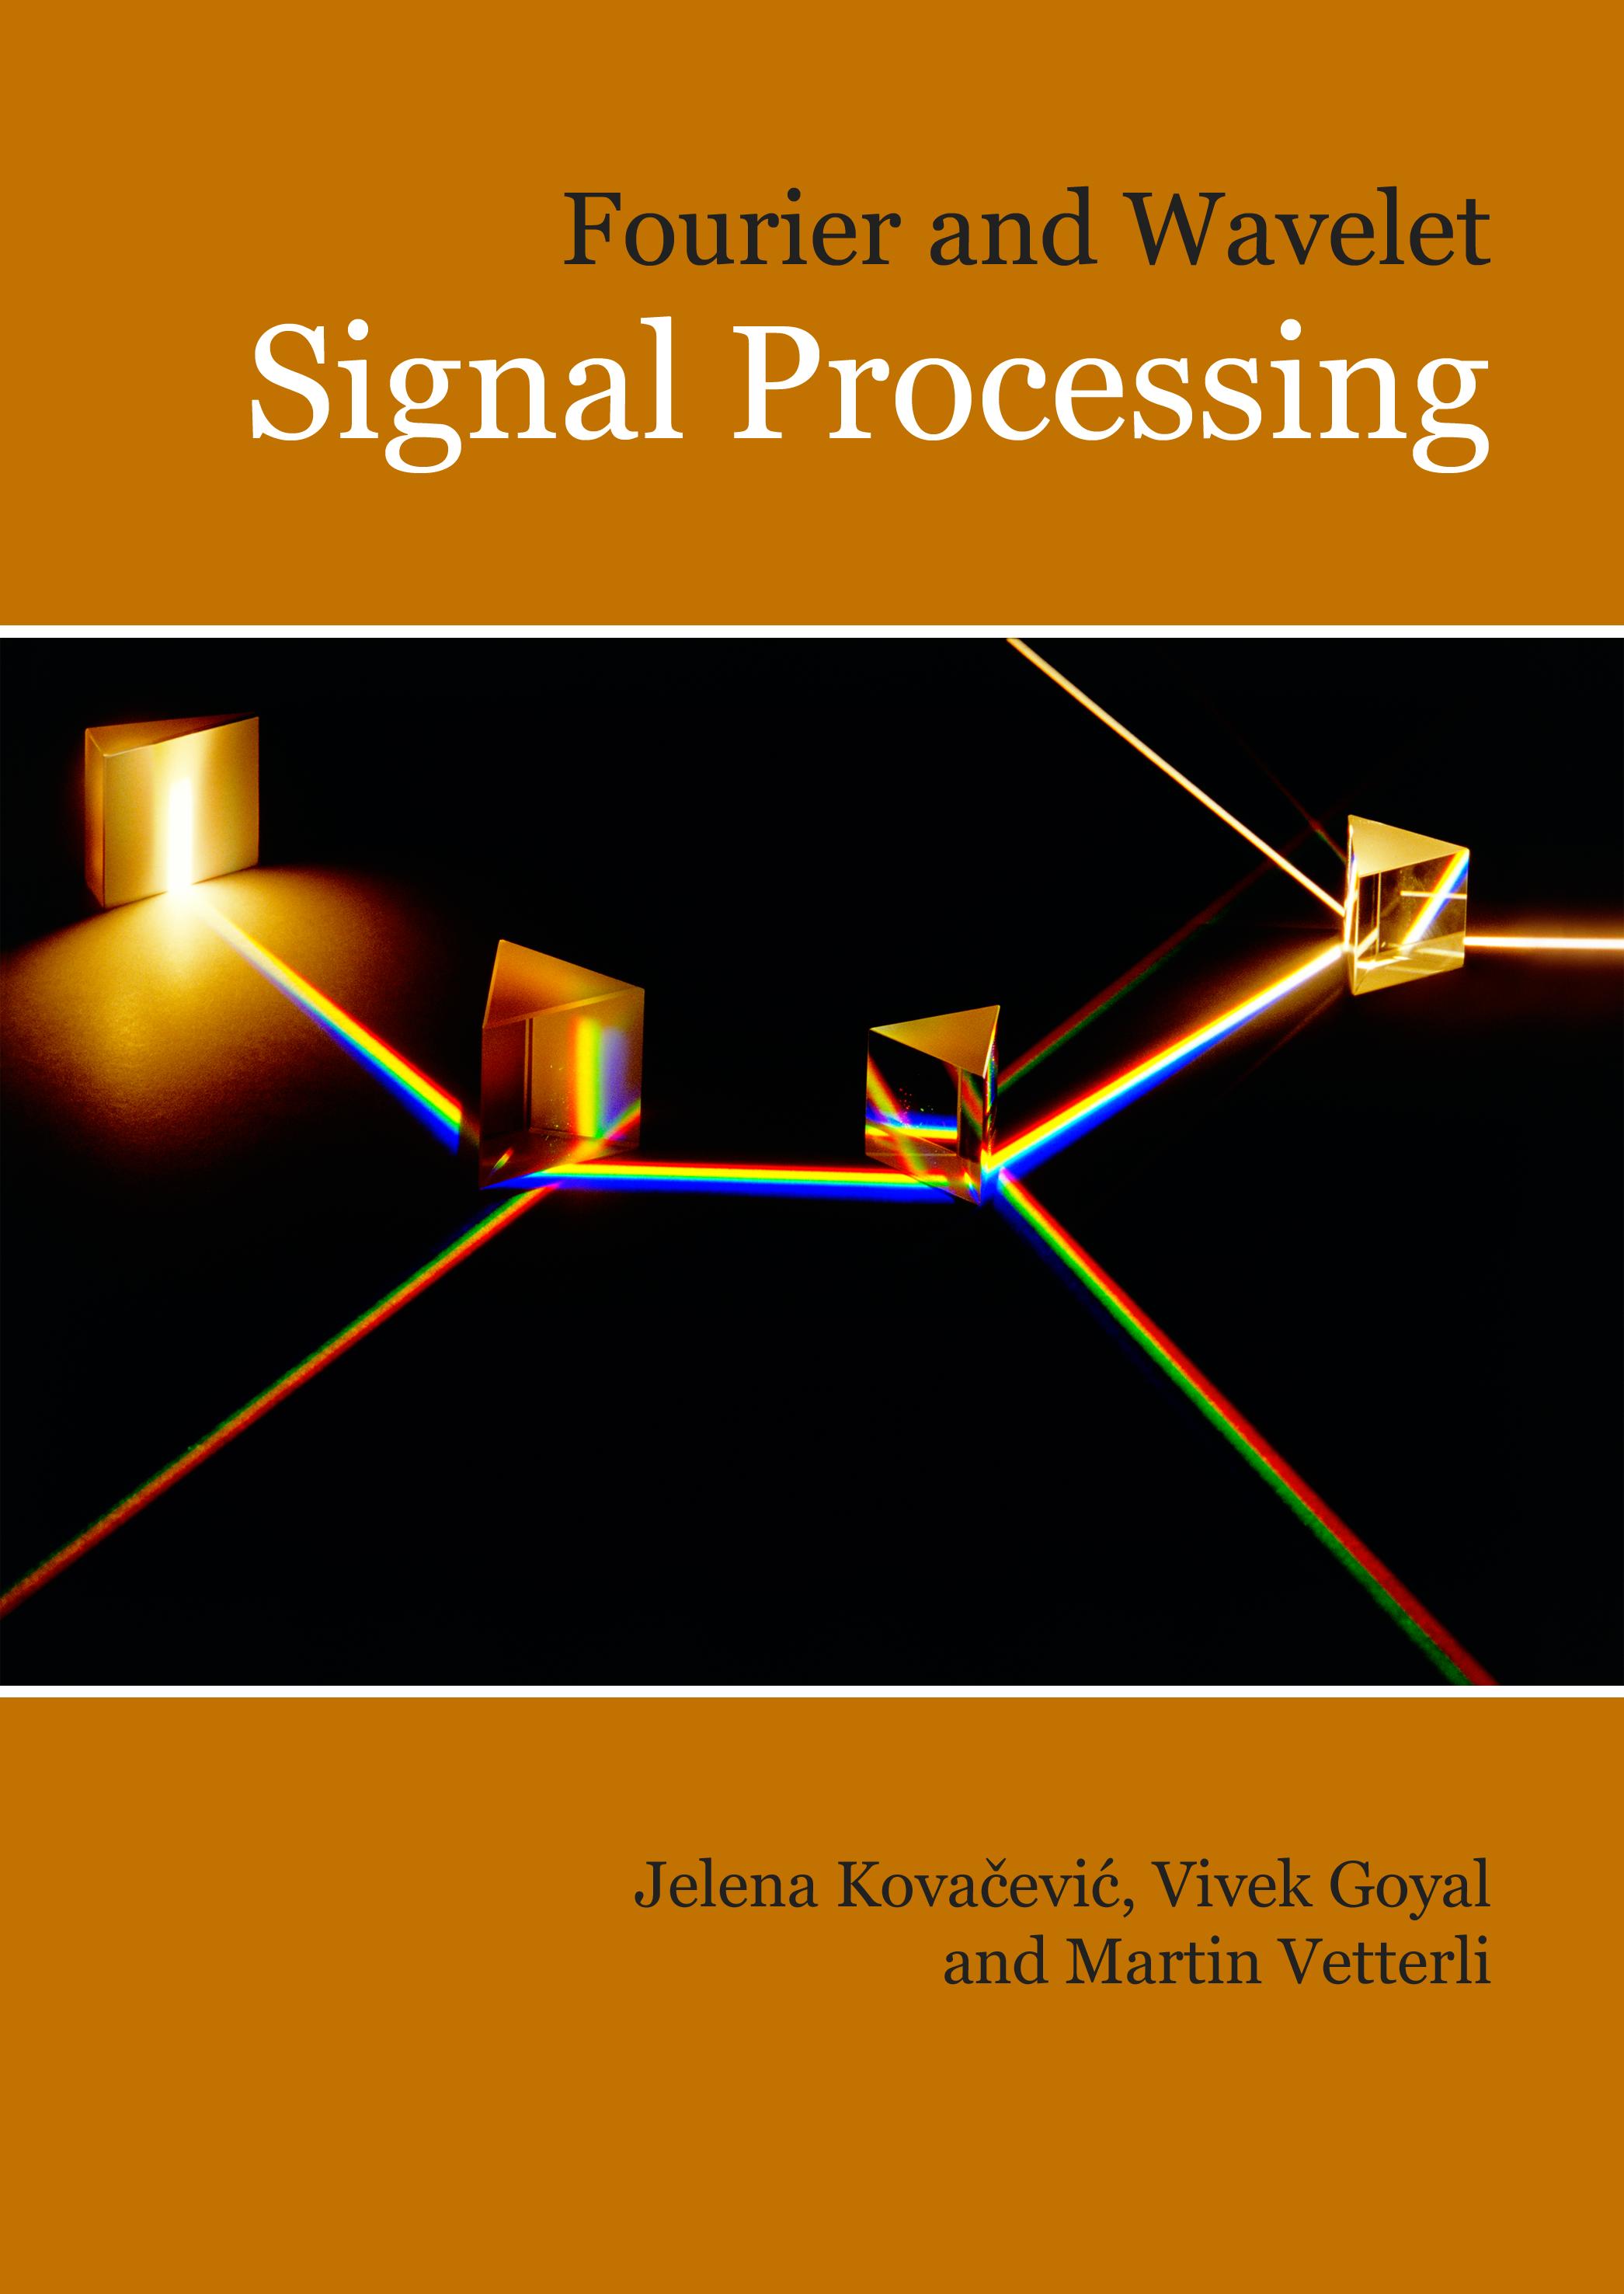 Fourier and Wavelet Signal Processing